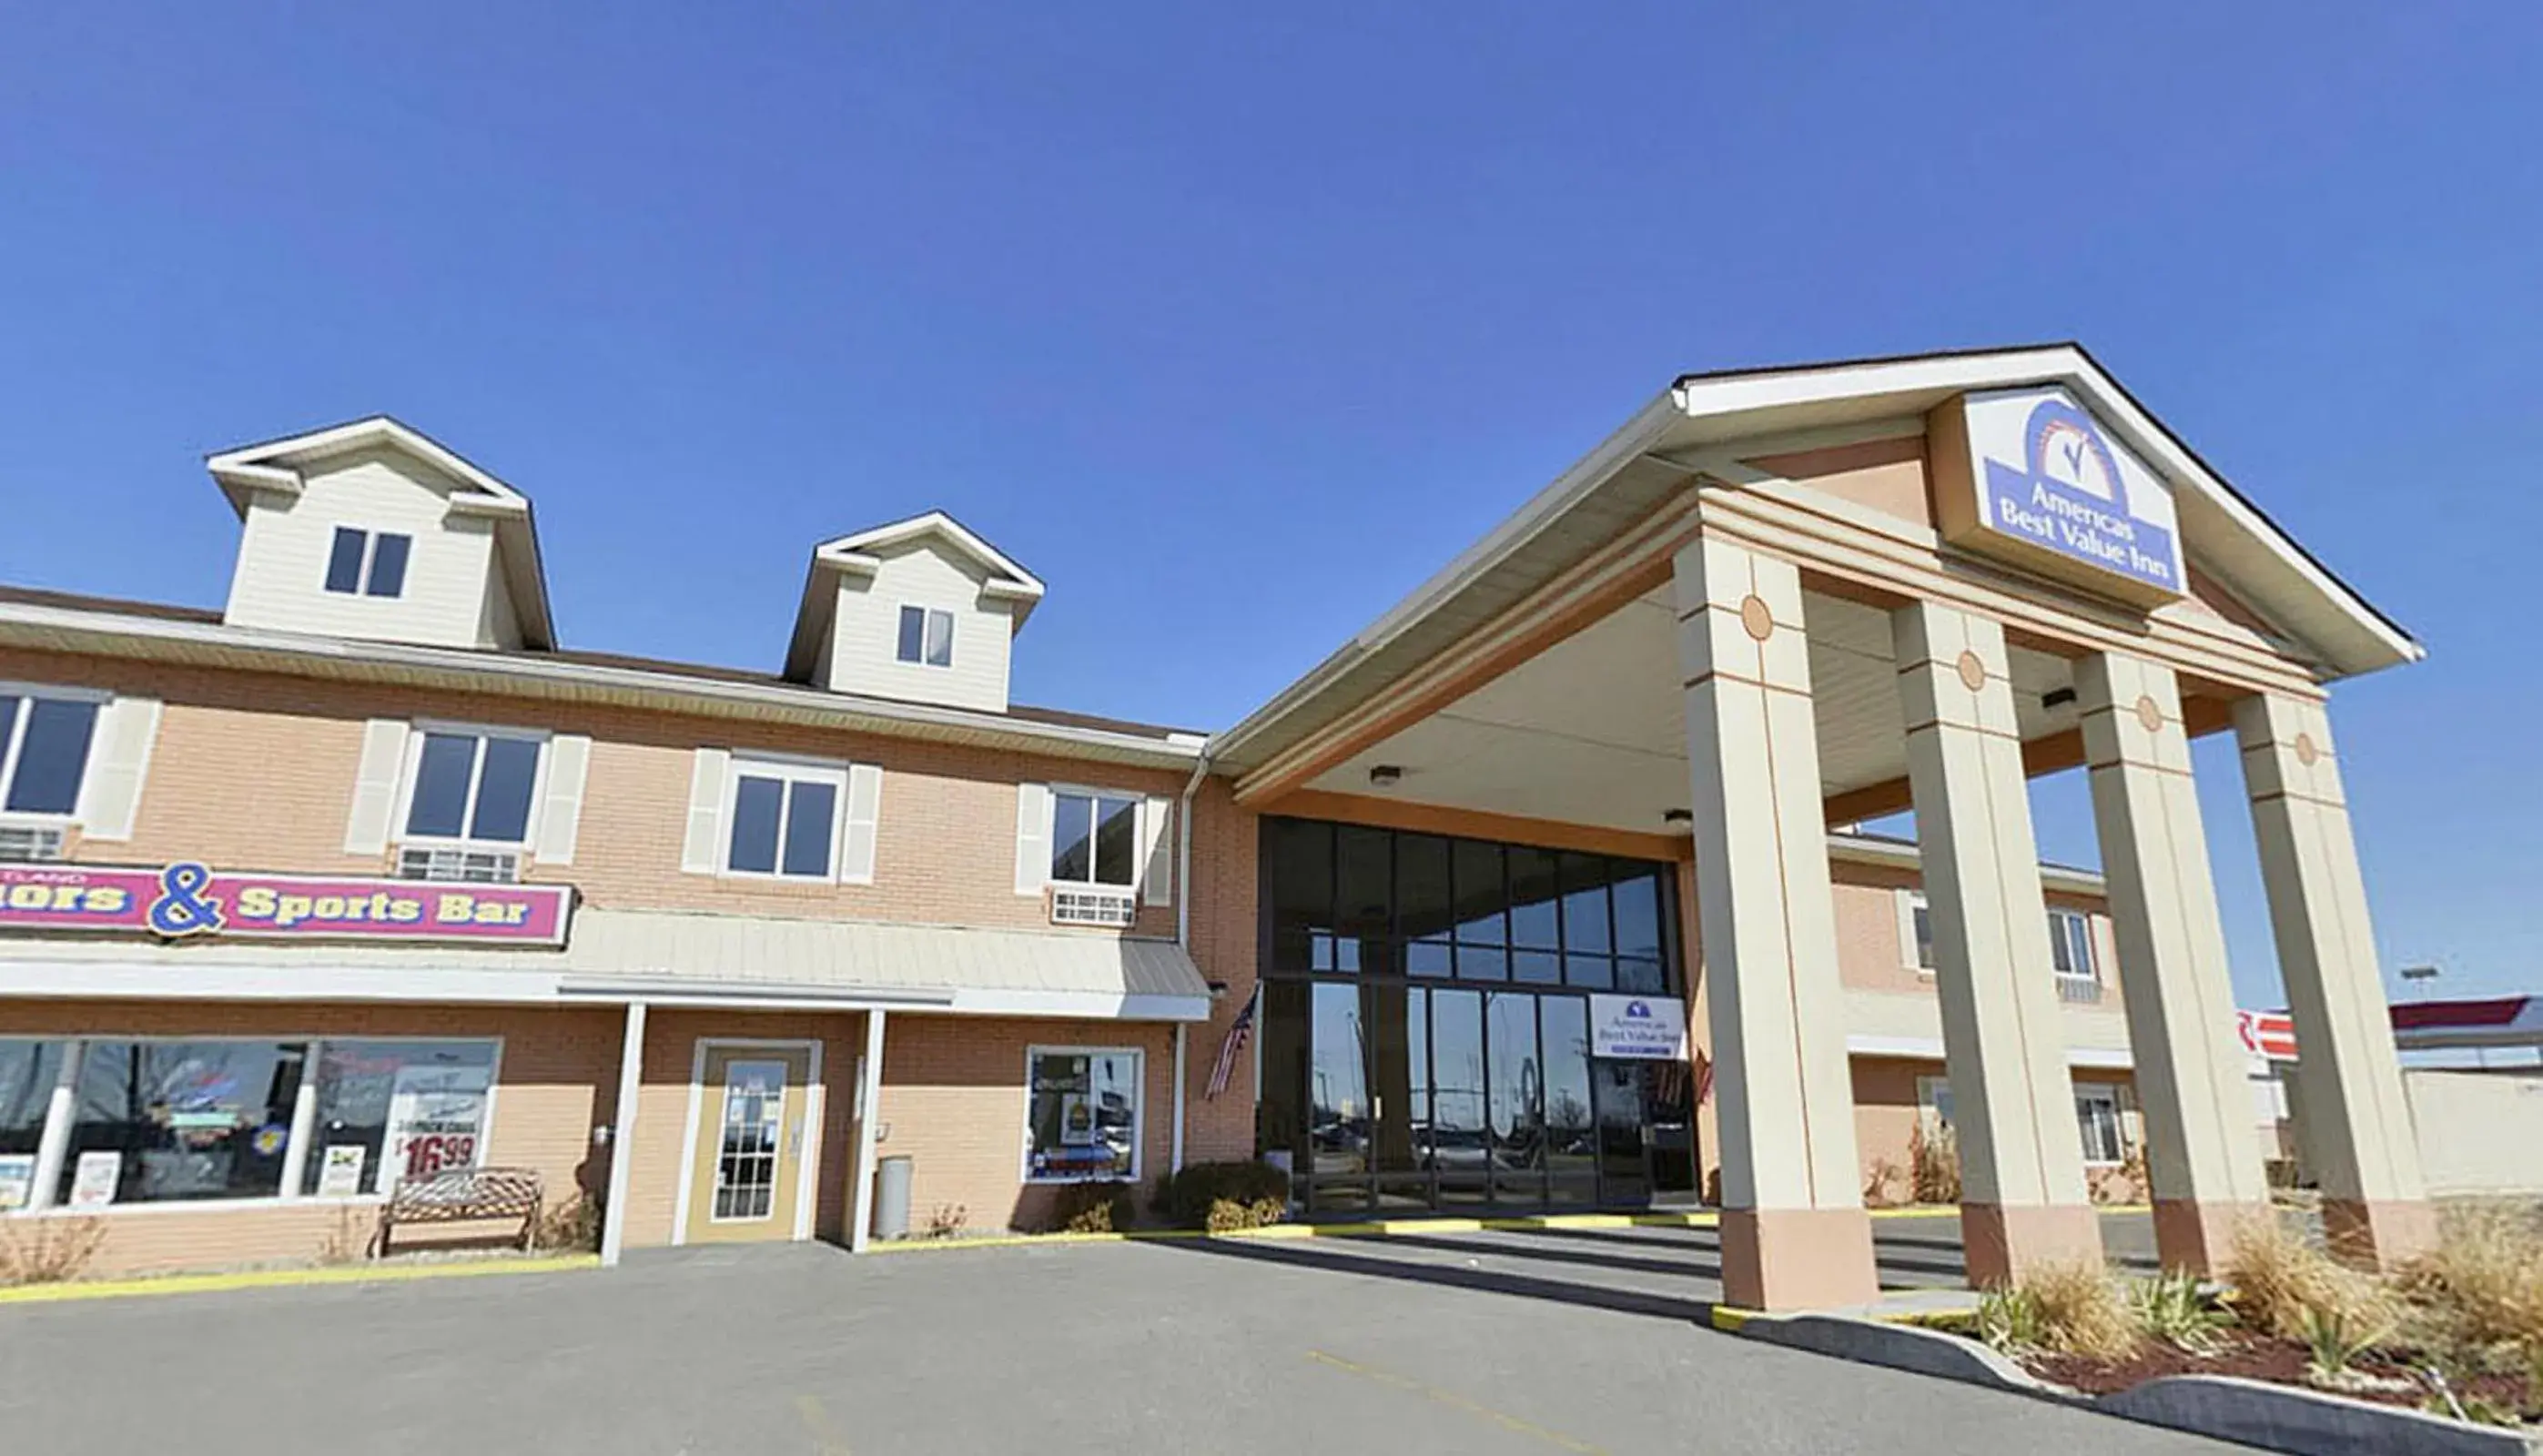 Facade/entrance, Property Building in America's Best Value Inn-Marion